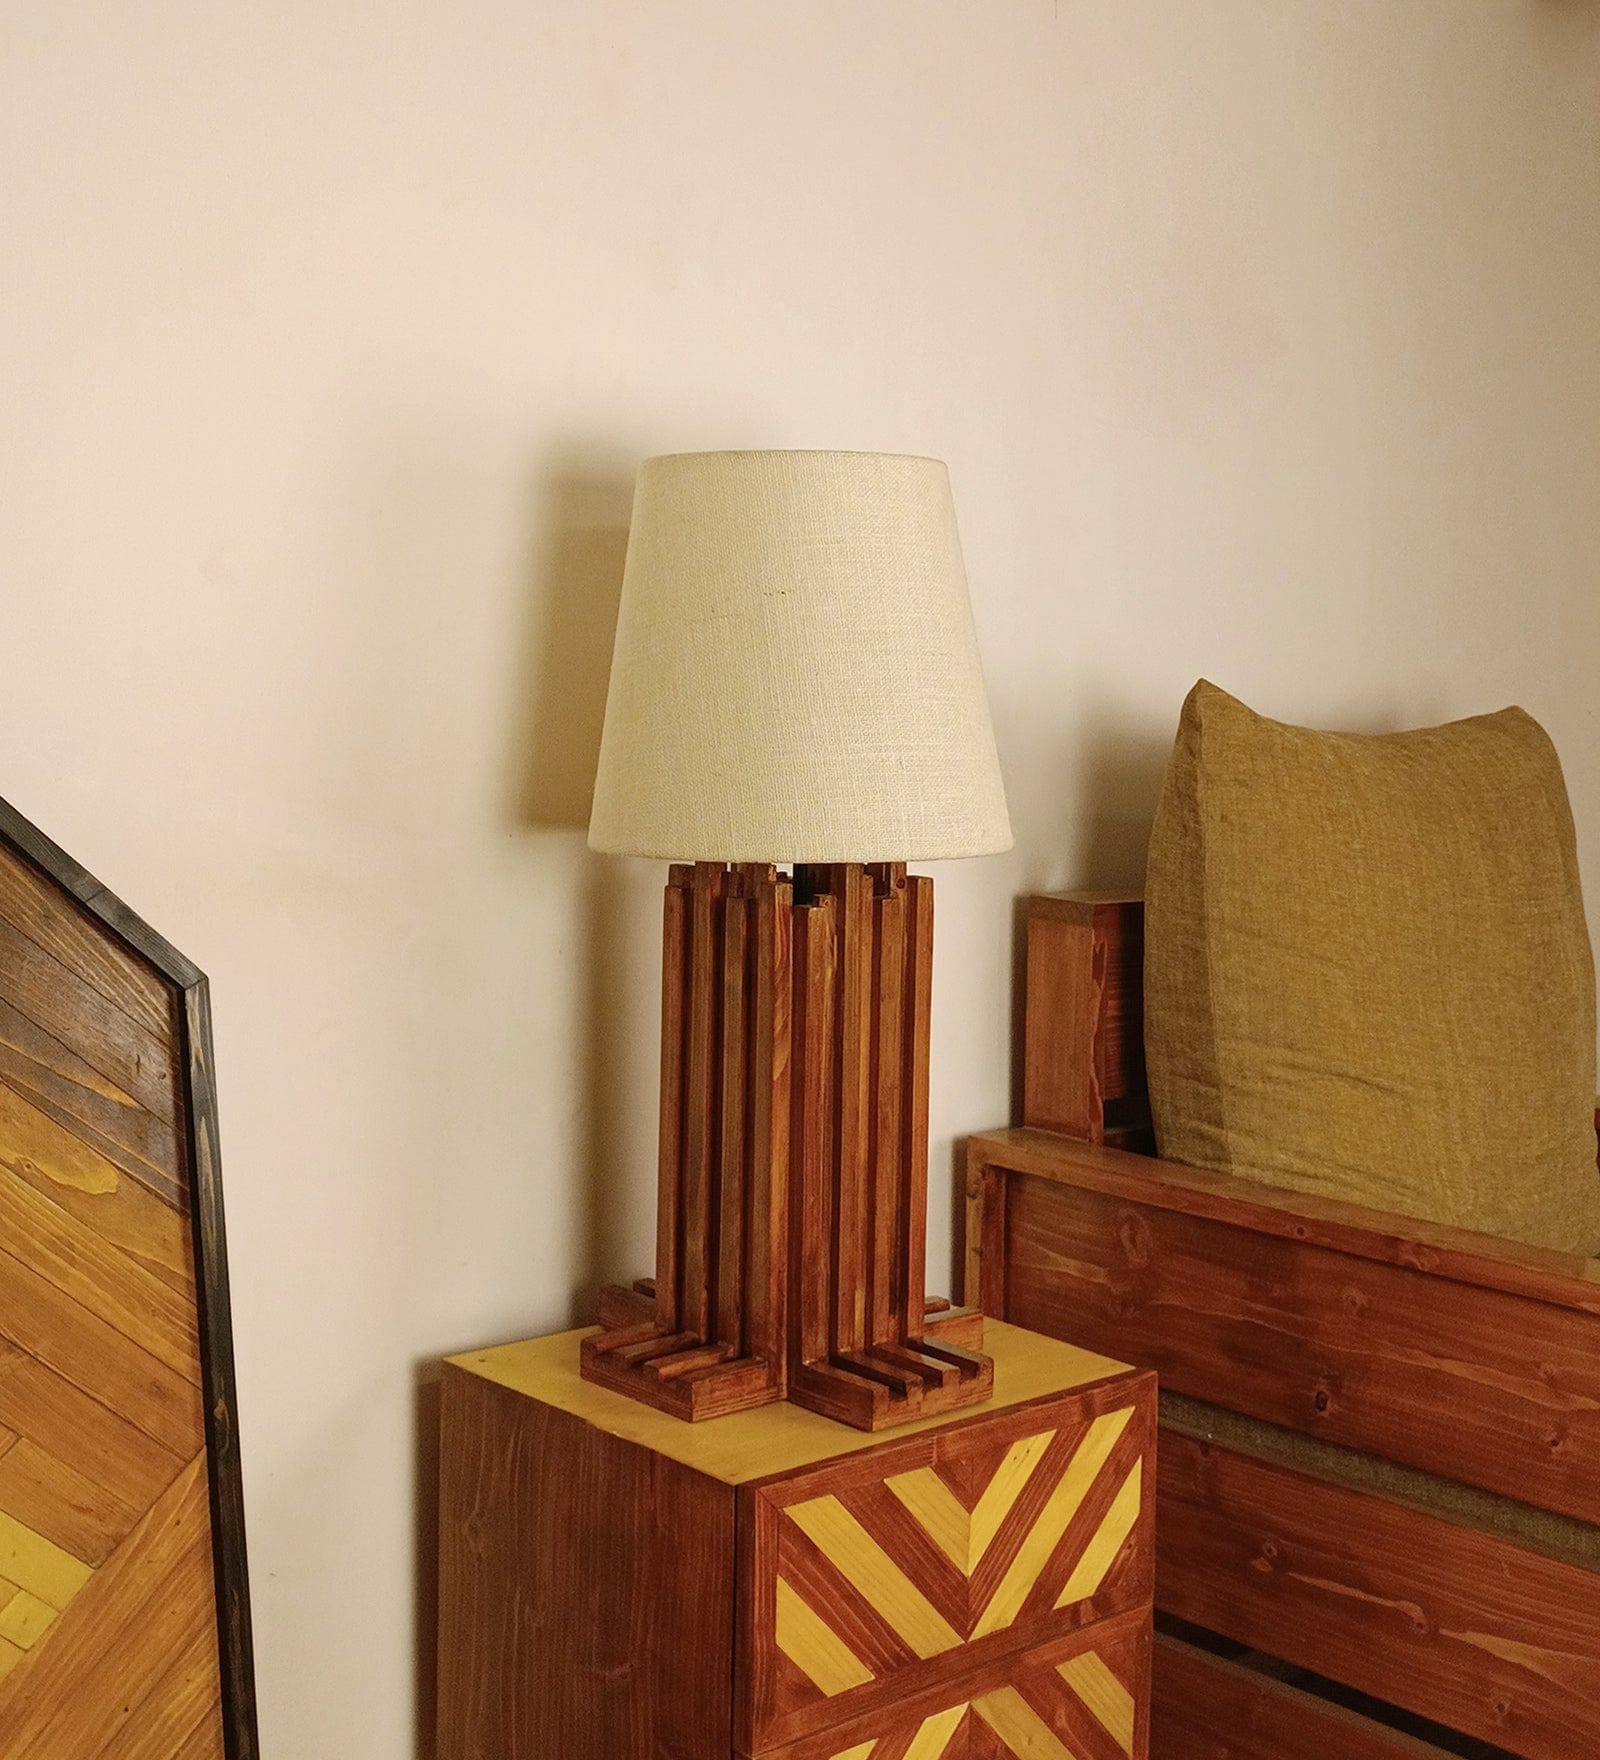 Palisade Brown Wooden Table Lamp with White Fabric Lampshade (BULB NOT INCLUDED)